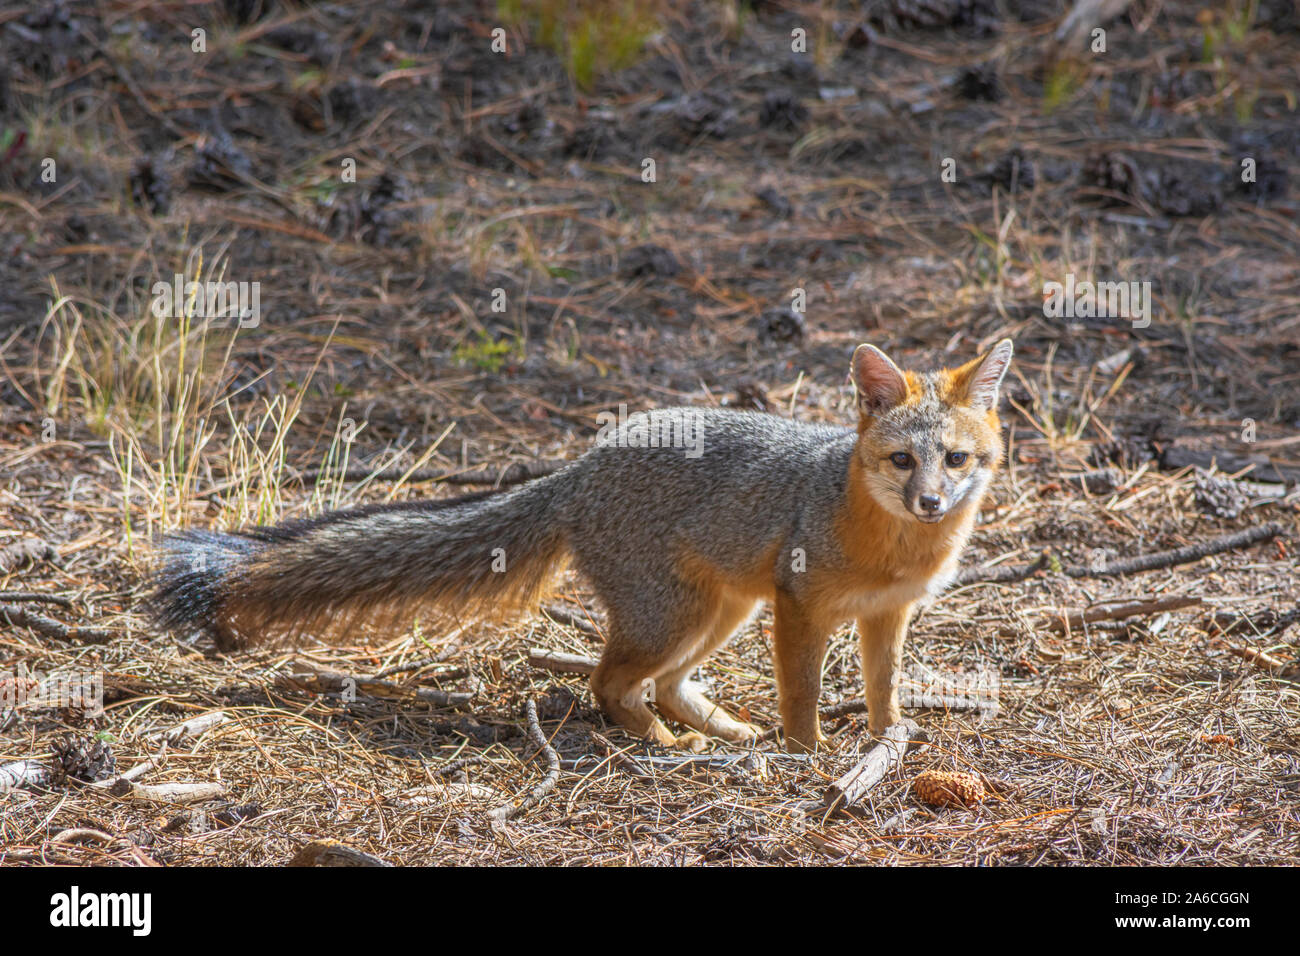 Young Gray Fox or Grey Fox (Urocyon cinereoargenteus), eyes photographer in the Pike National Forest Colorado USA. Photo taken in October. Stock Photo